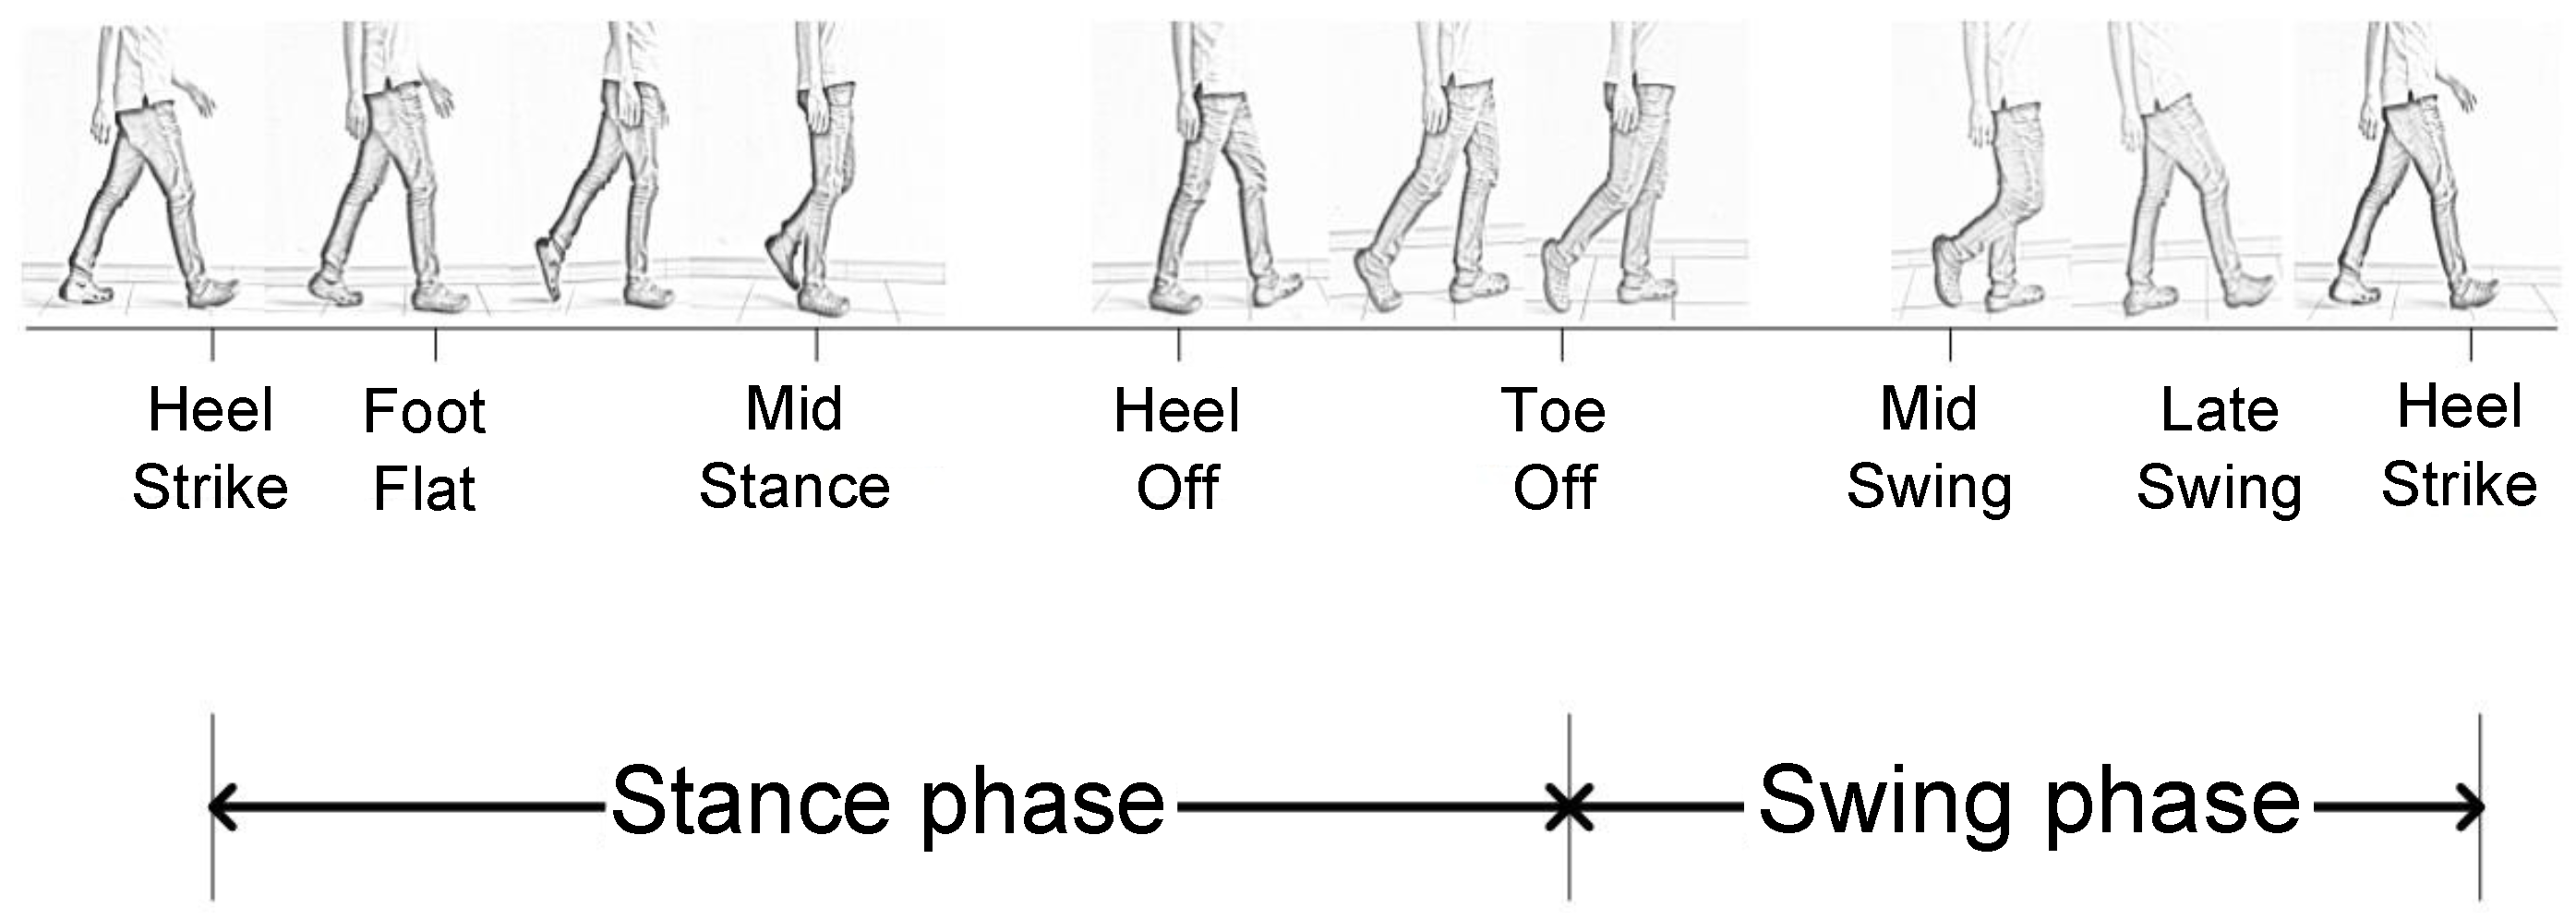 Sensors | Free Full-Text | Stride Counting in Human Walking and Walking  Distance Estimation Using Insole Sensors